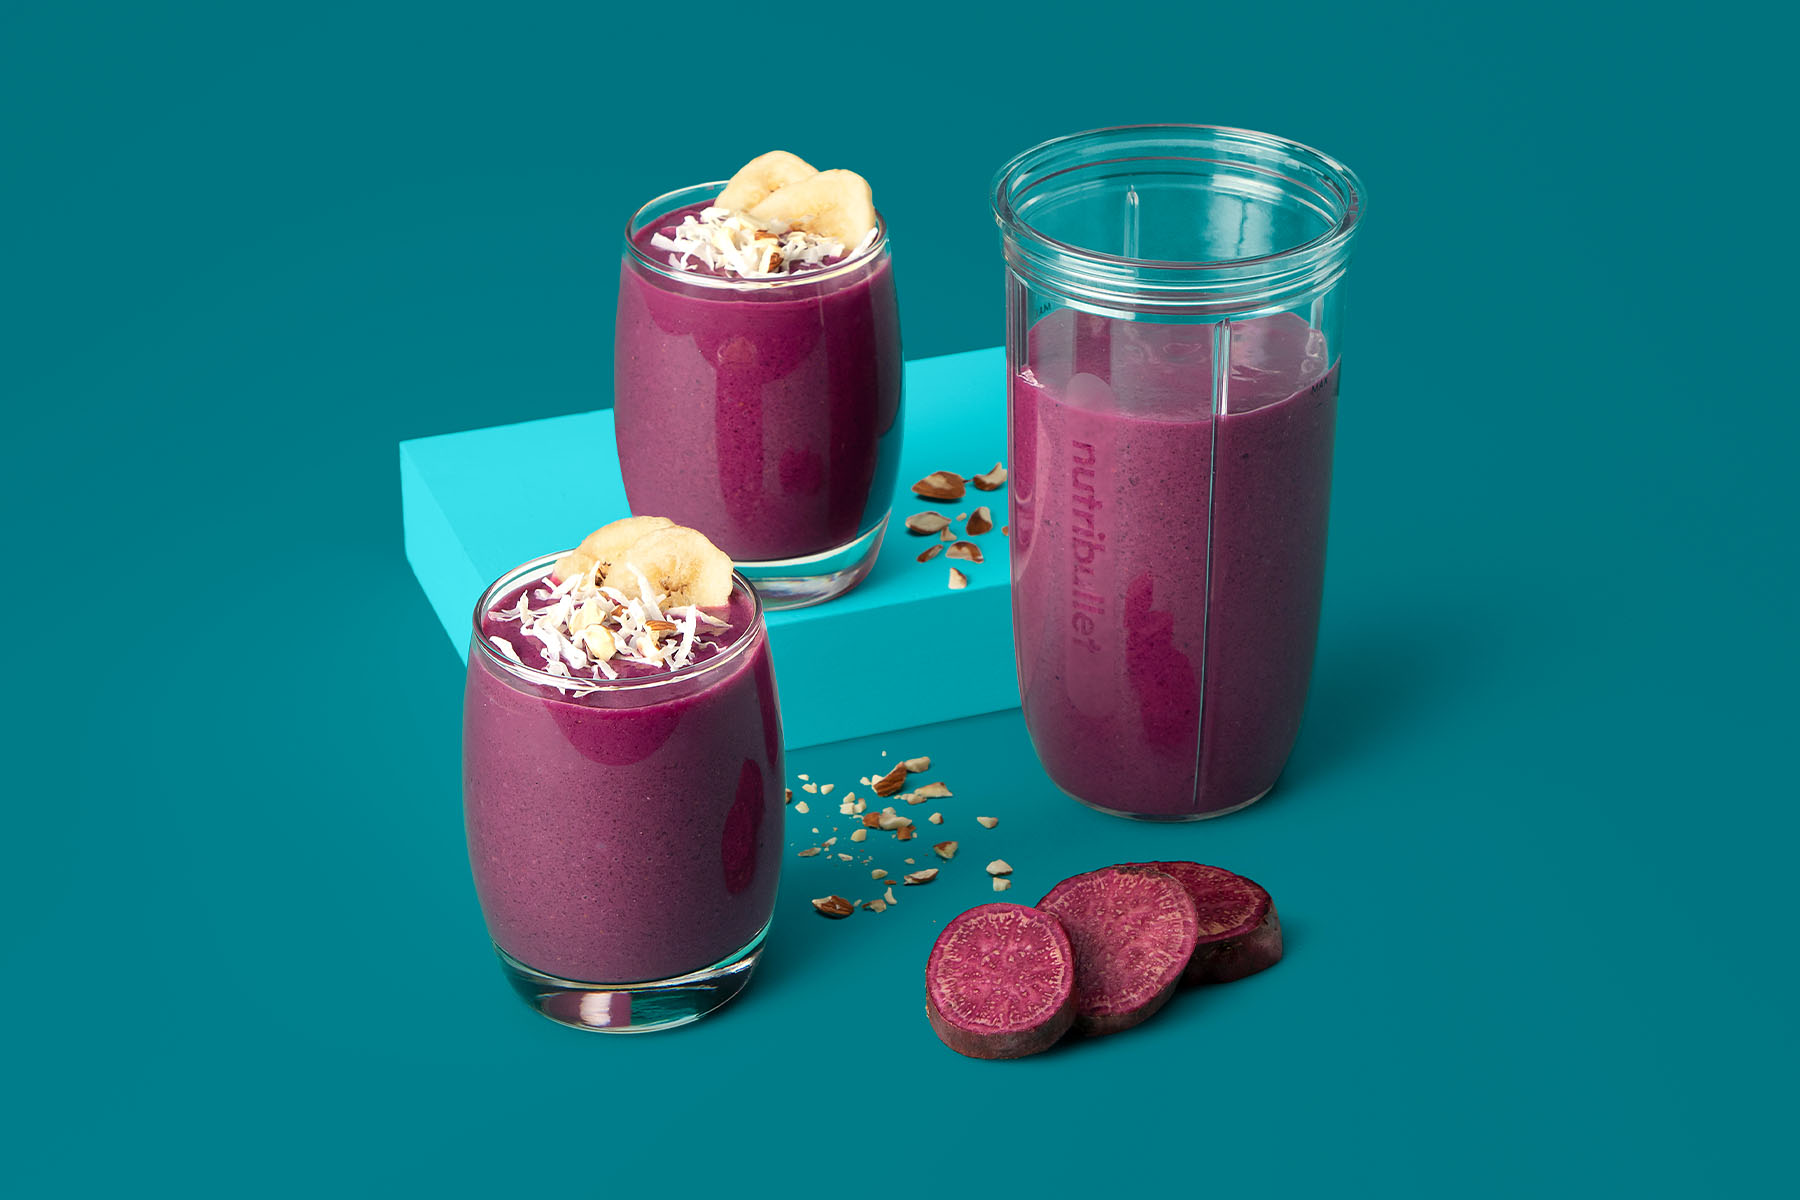 Purple sweet potato pie smoothies topped with sliced banana and coconut on turquoise background